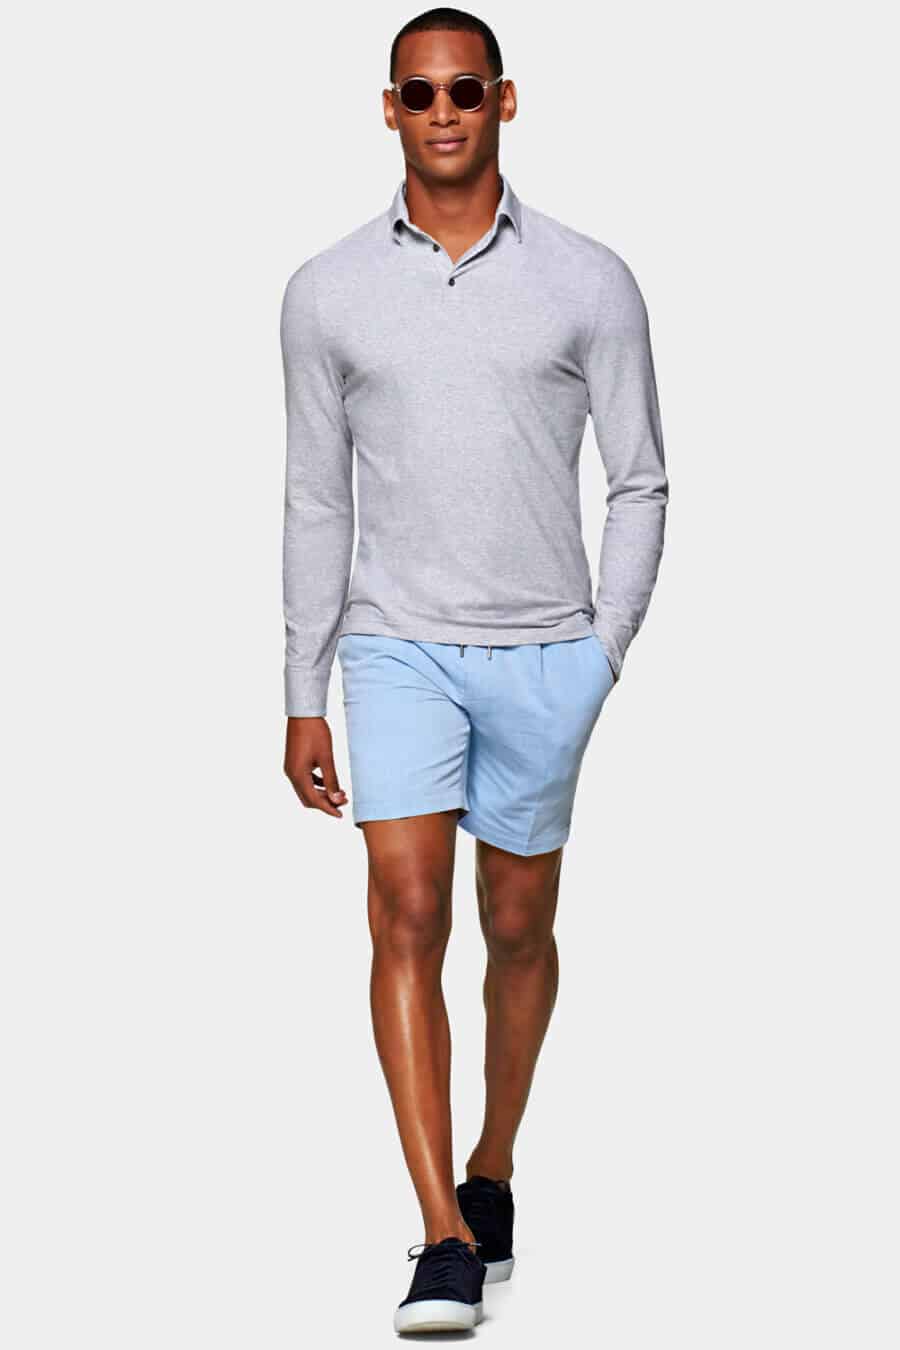 Men's pale blue shorts outfit with a shirt and grey v-neck sweater